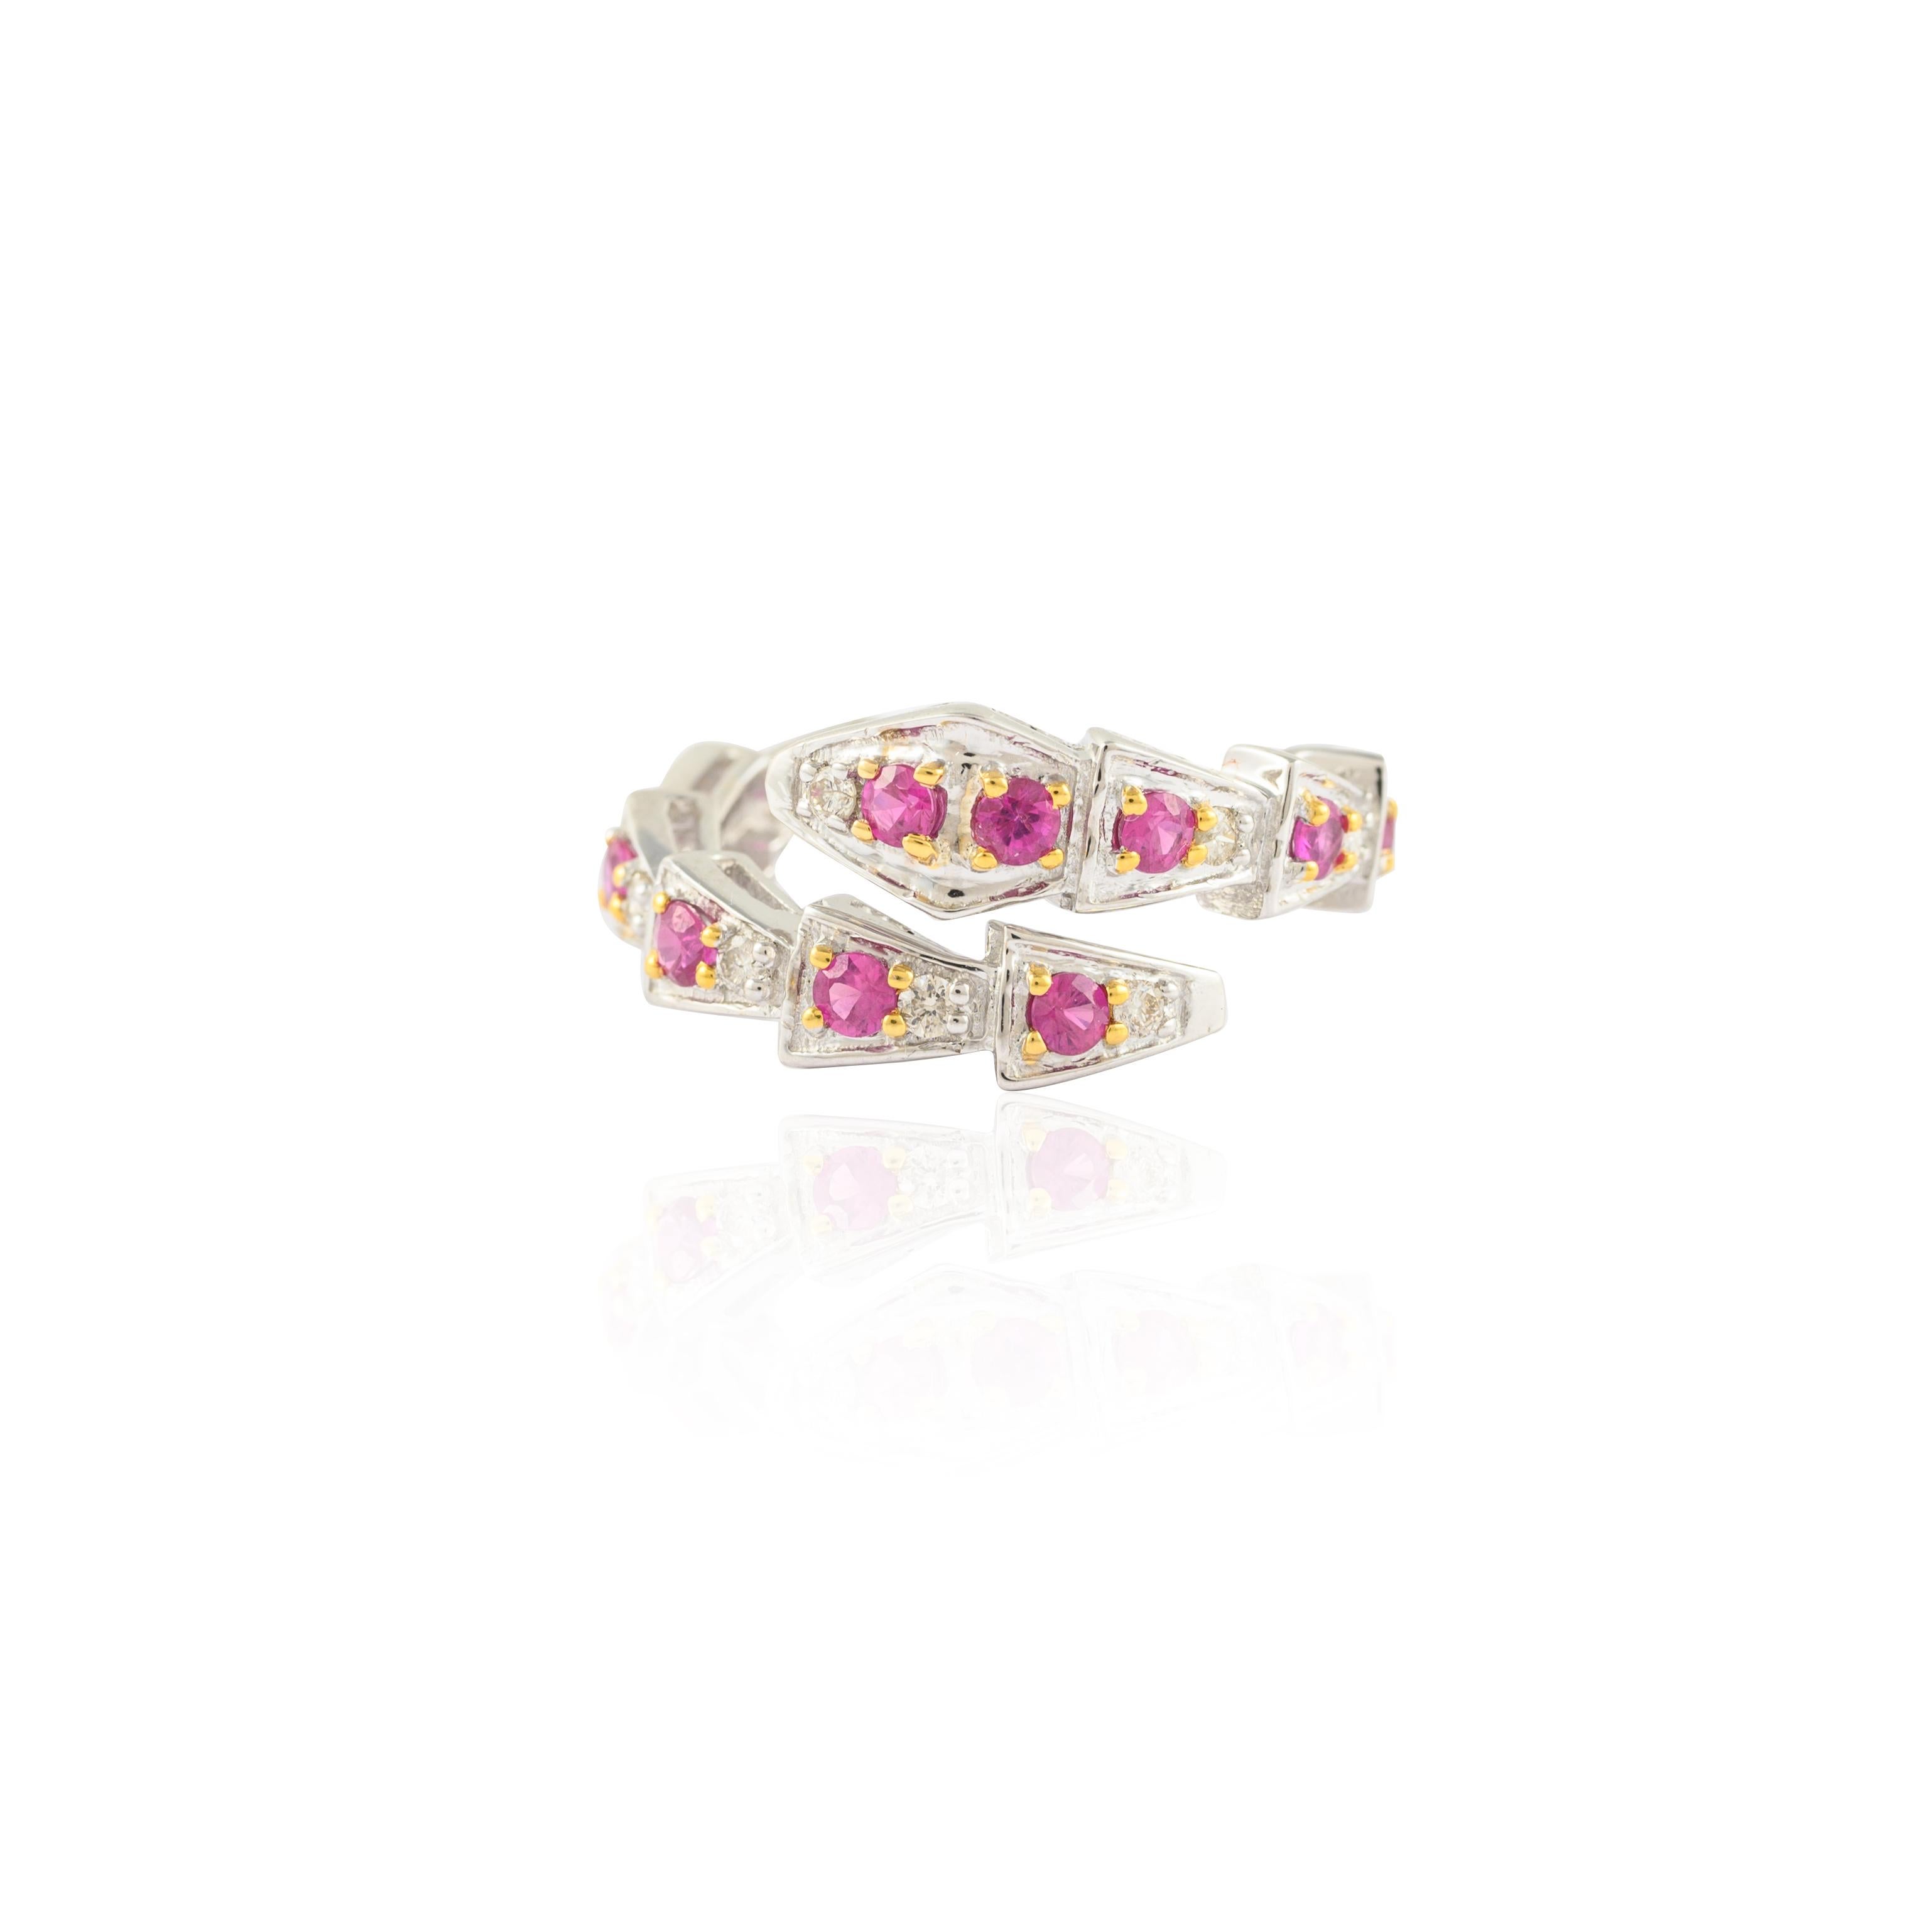 For Sale:  Diamond and Natural Ruby Snake Ring in 14K Solid White Gold 7